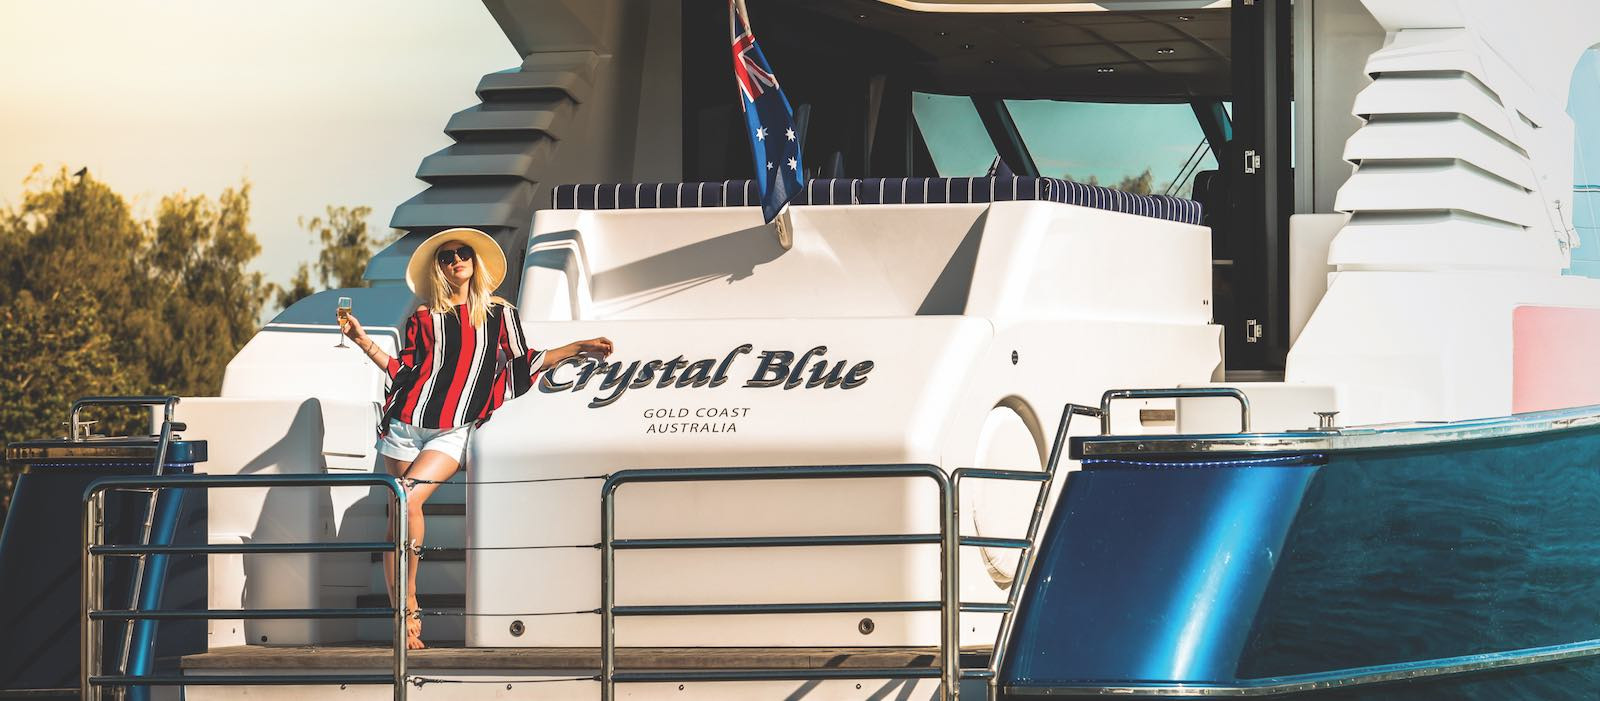 Luxury boat hire on Crystal Blue woman sipping champagne on swim deck